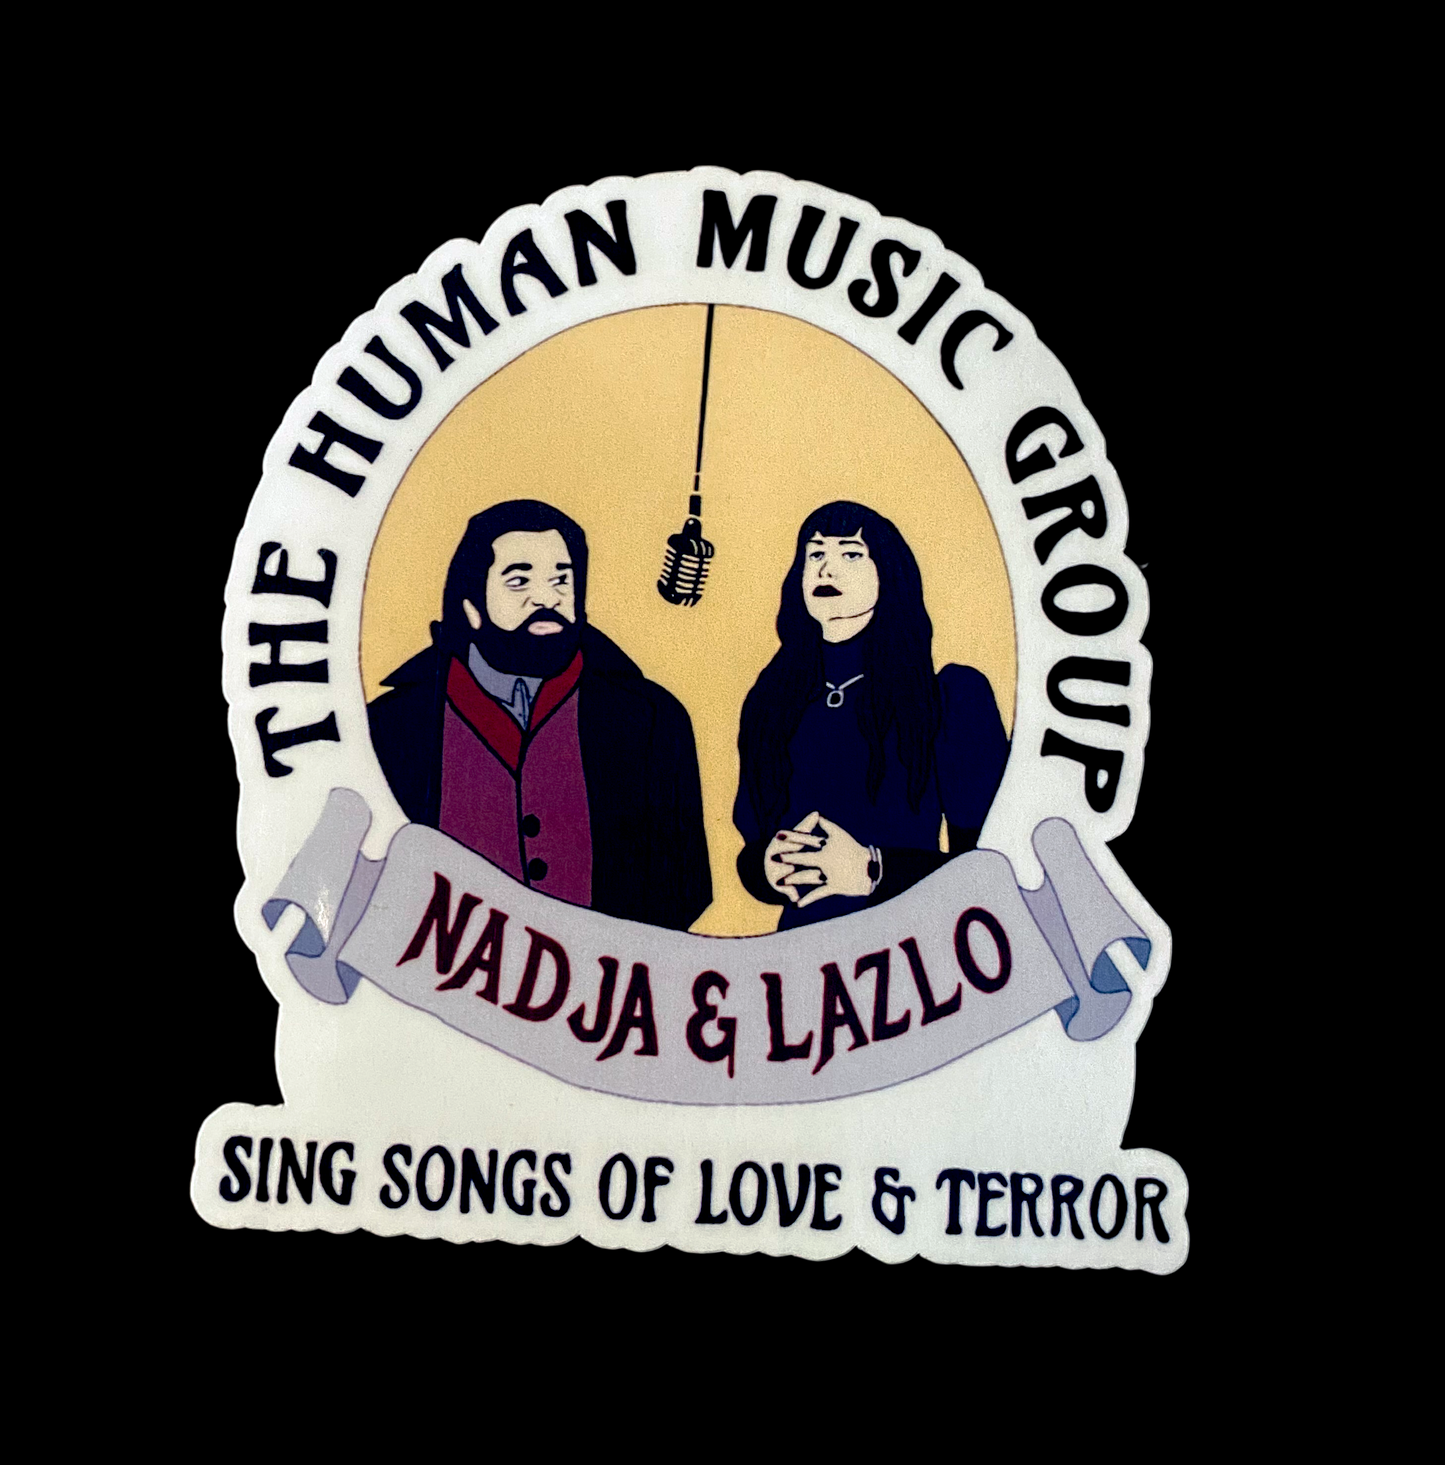 What We Do in the Shadows Music Sticker